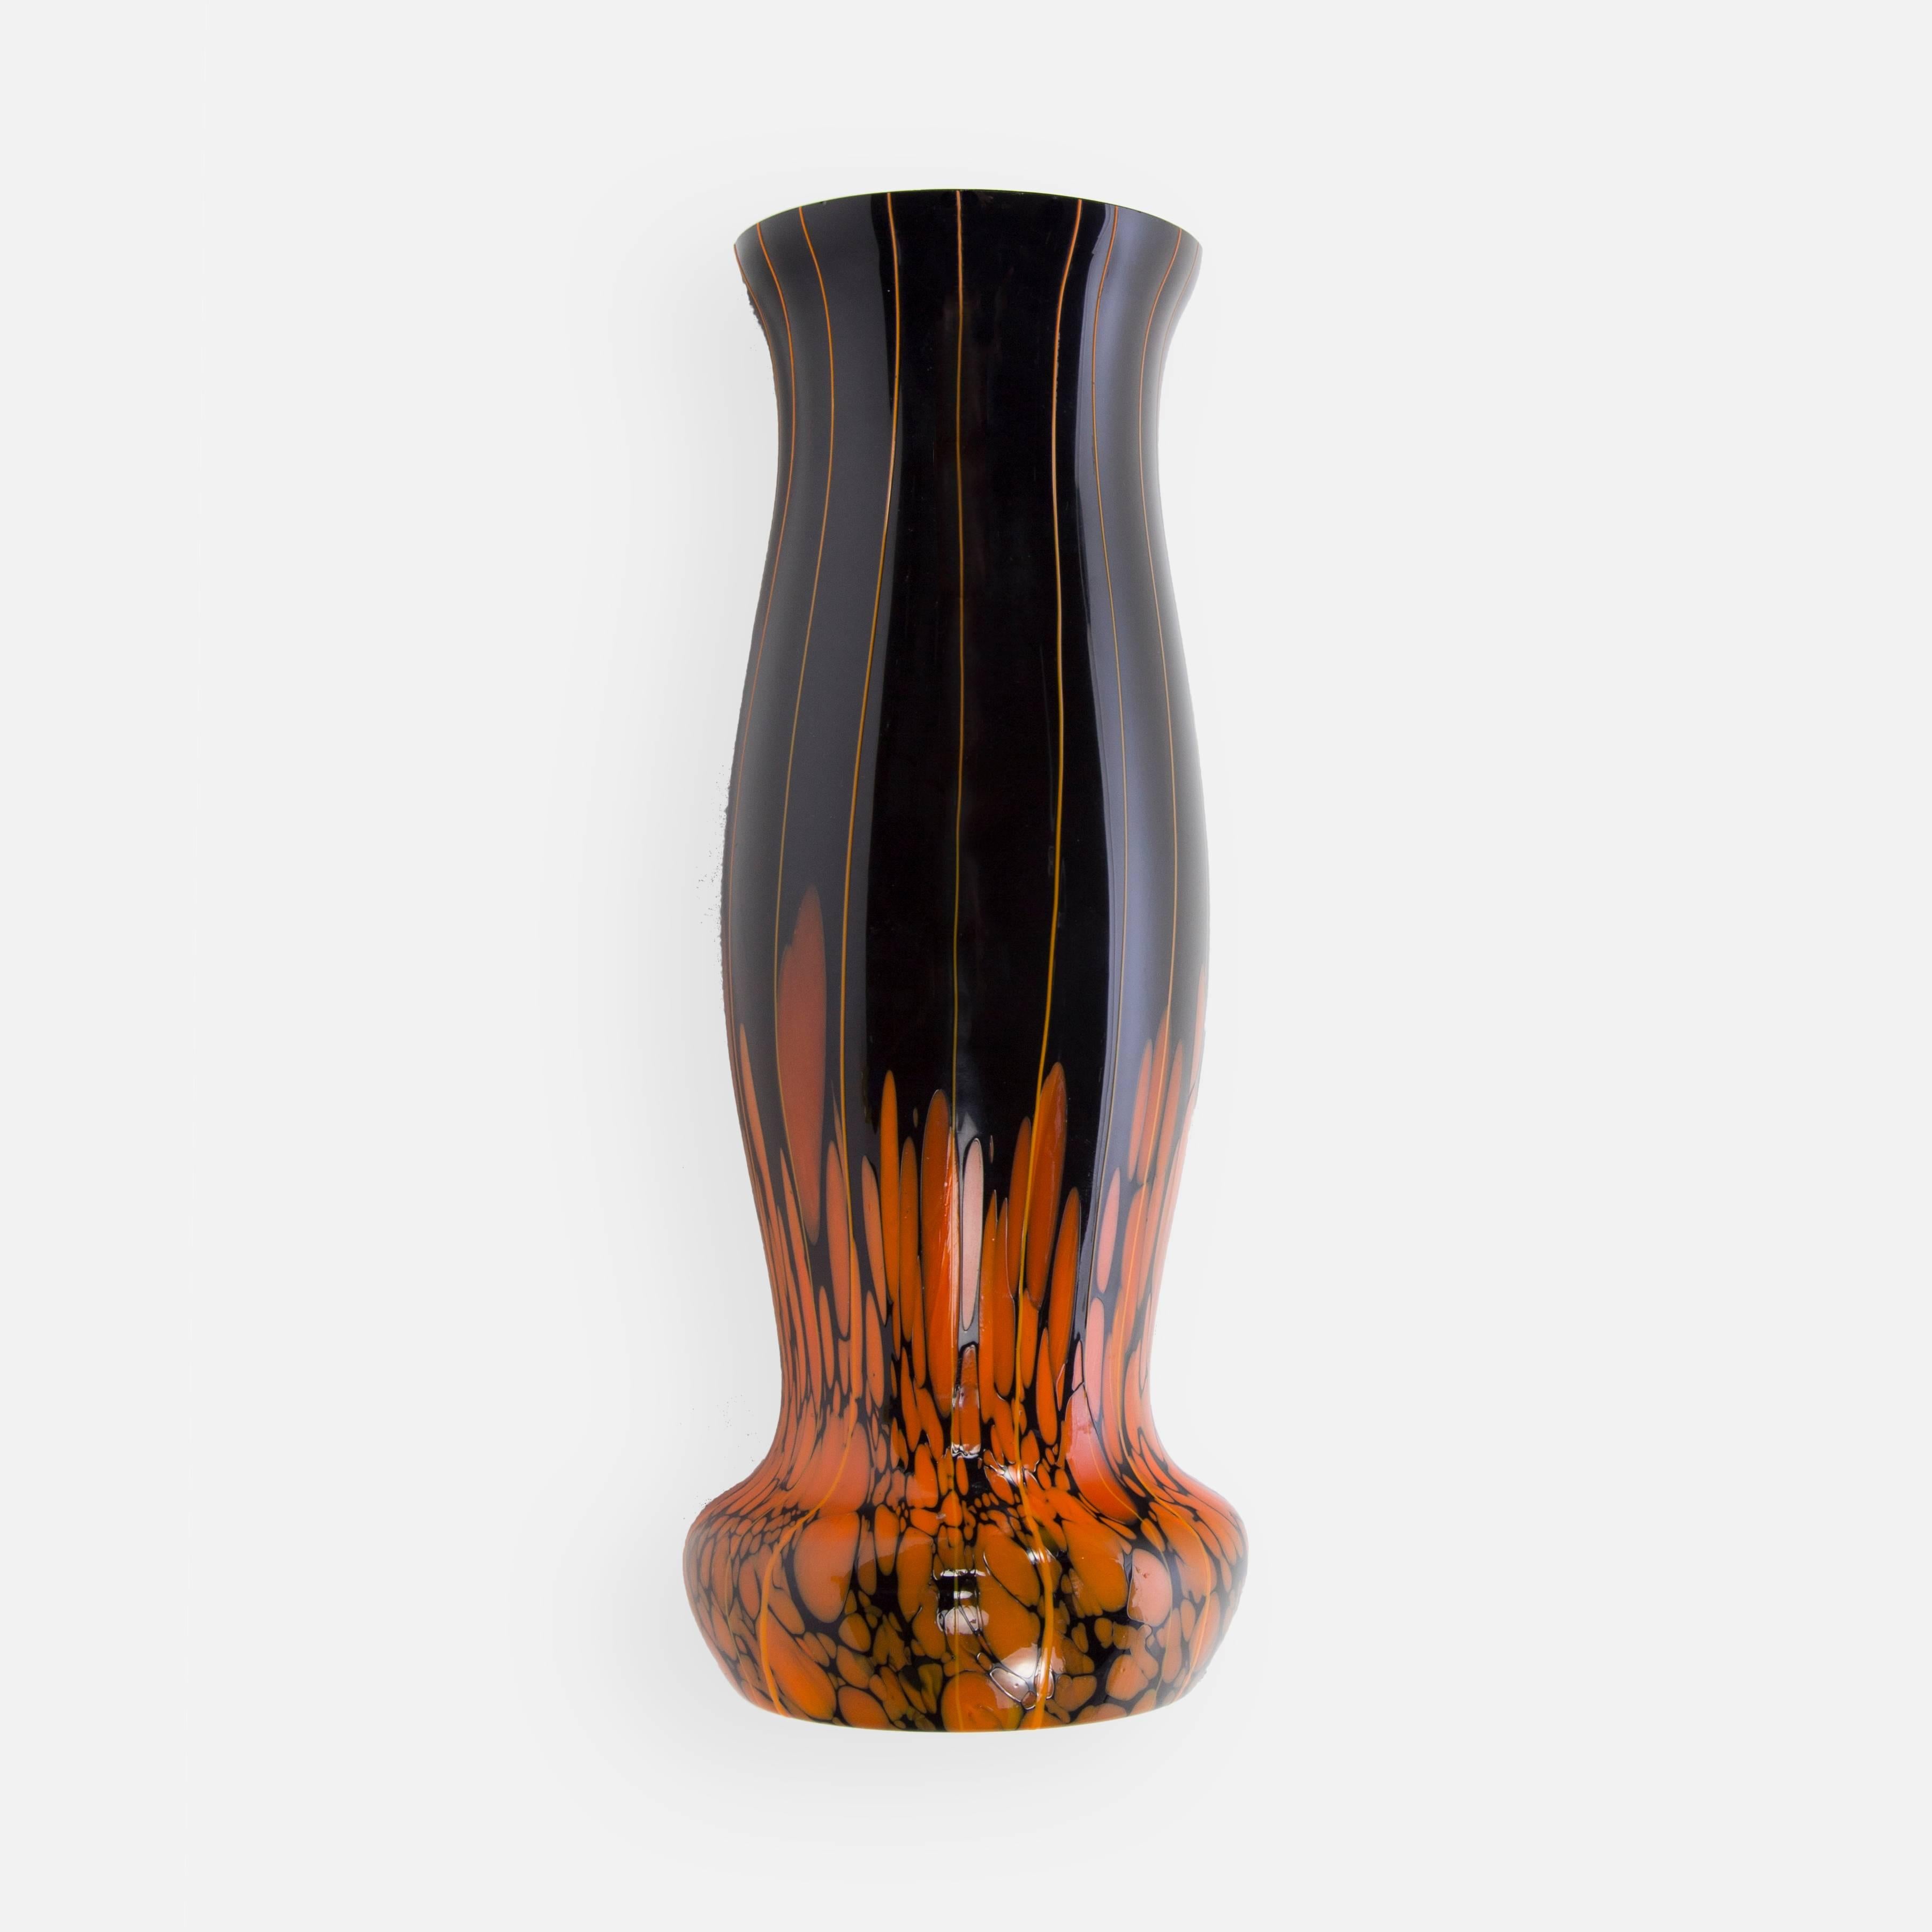 Striking and beautifully handcrafted large retro art glass vase, black and orange heavy glass tapered shape with gorgeous and rare orange swirl designs; midcentury art studio; approximately 12 inches high, circa 1940s era.

 